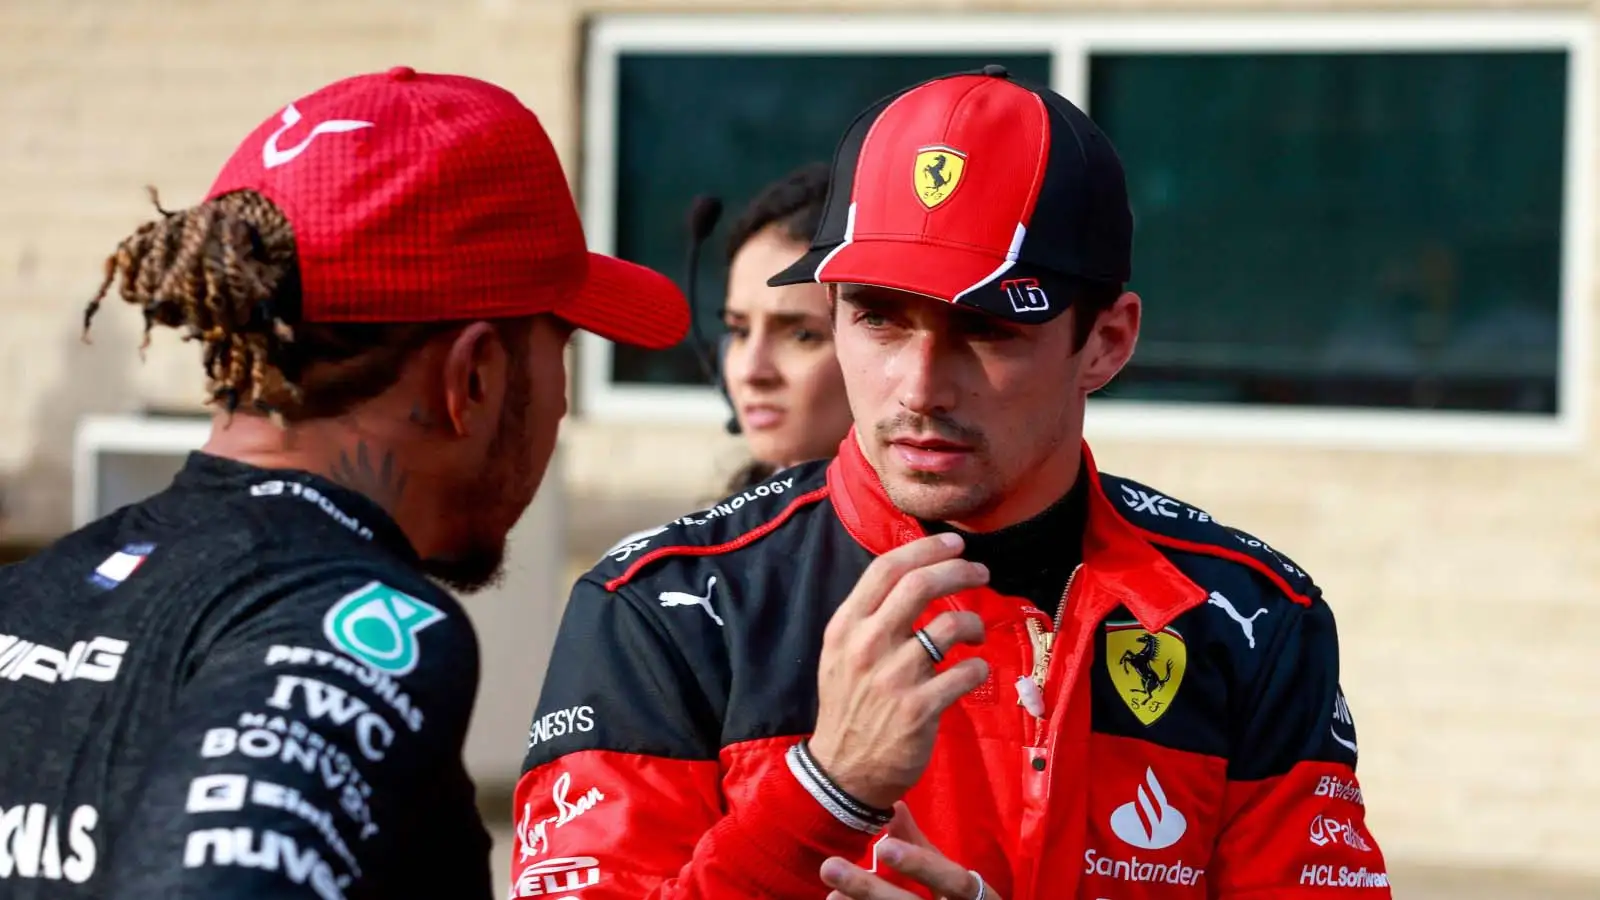 Lewis Hamilton with Charles Leclerc.